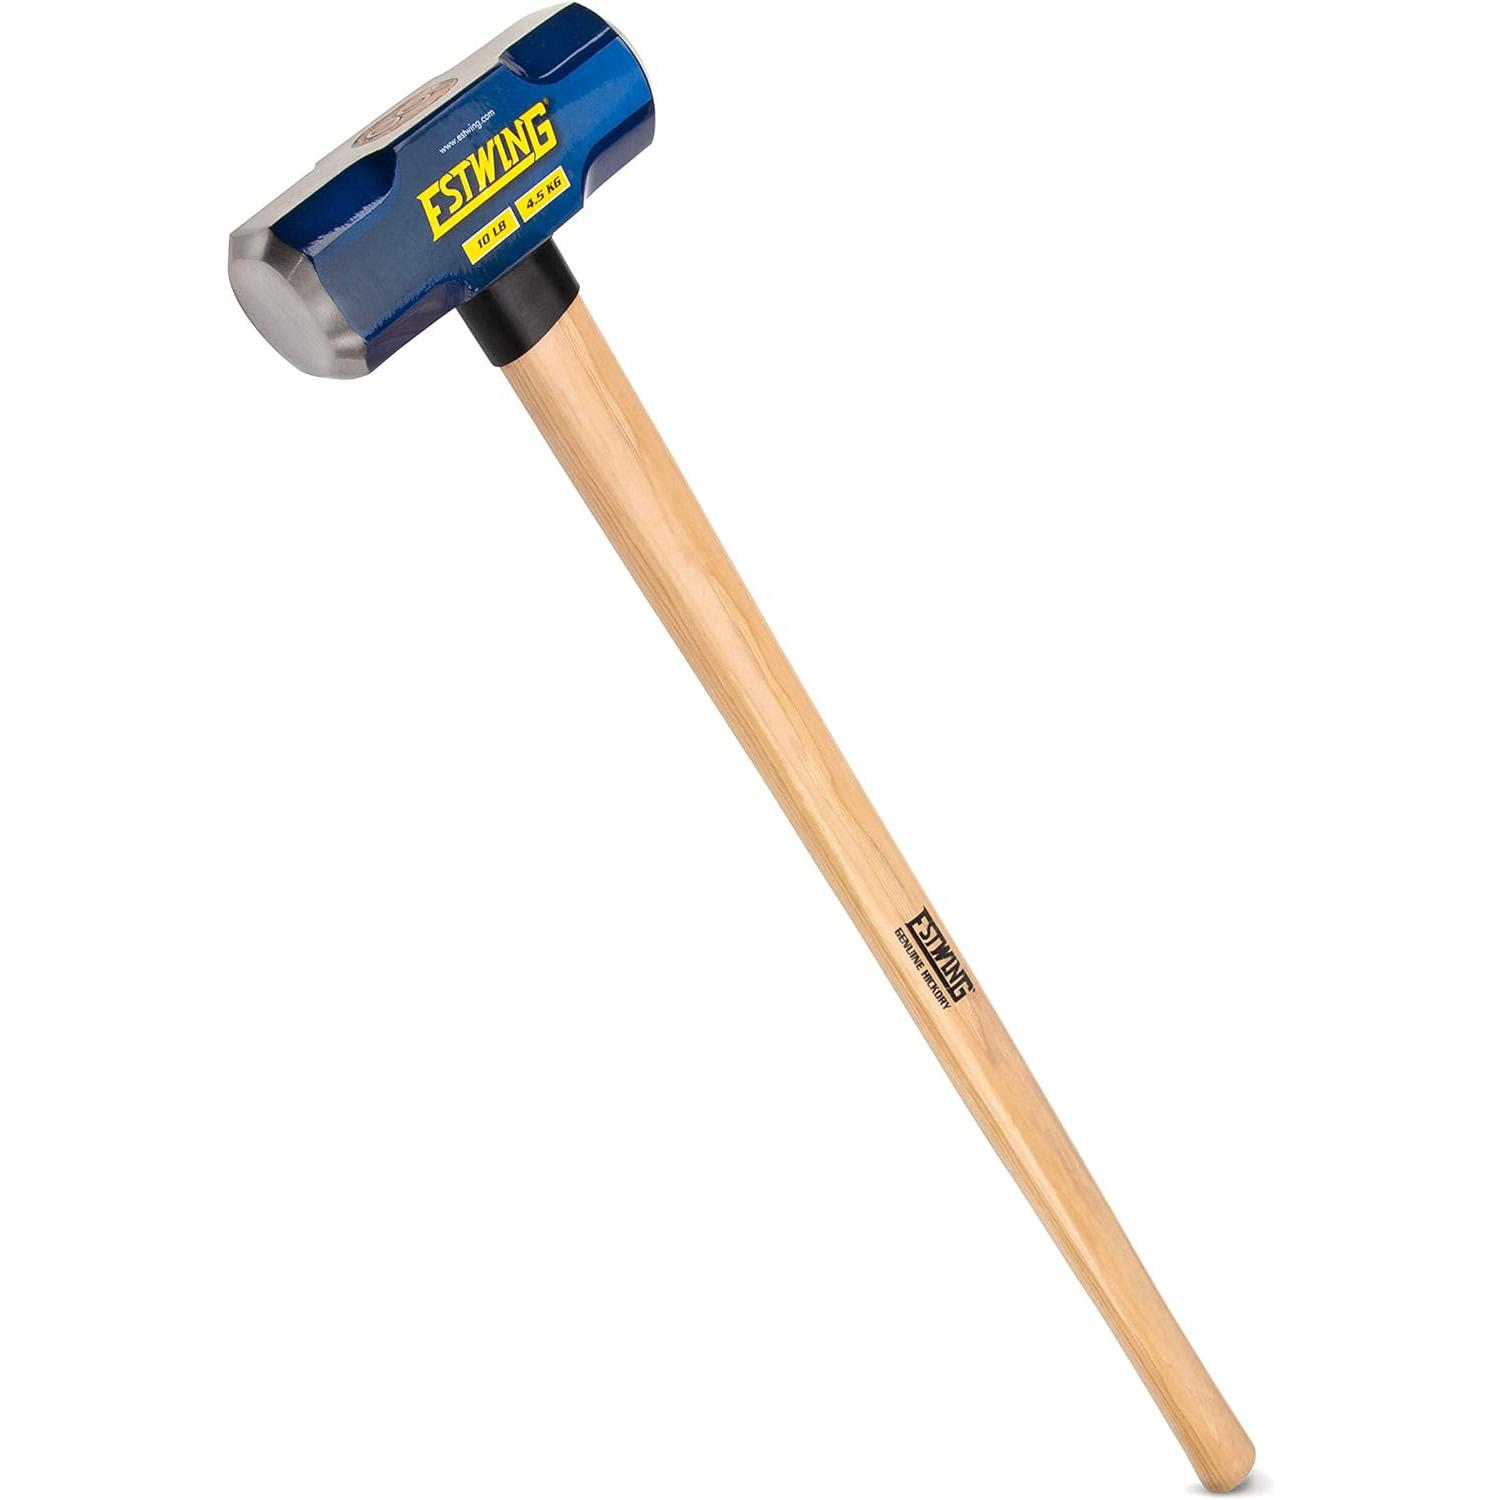 Estwing Hard Face Sledge Hammer for $33.99